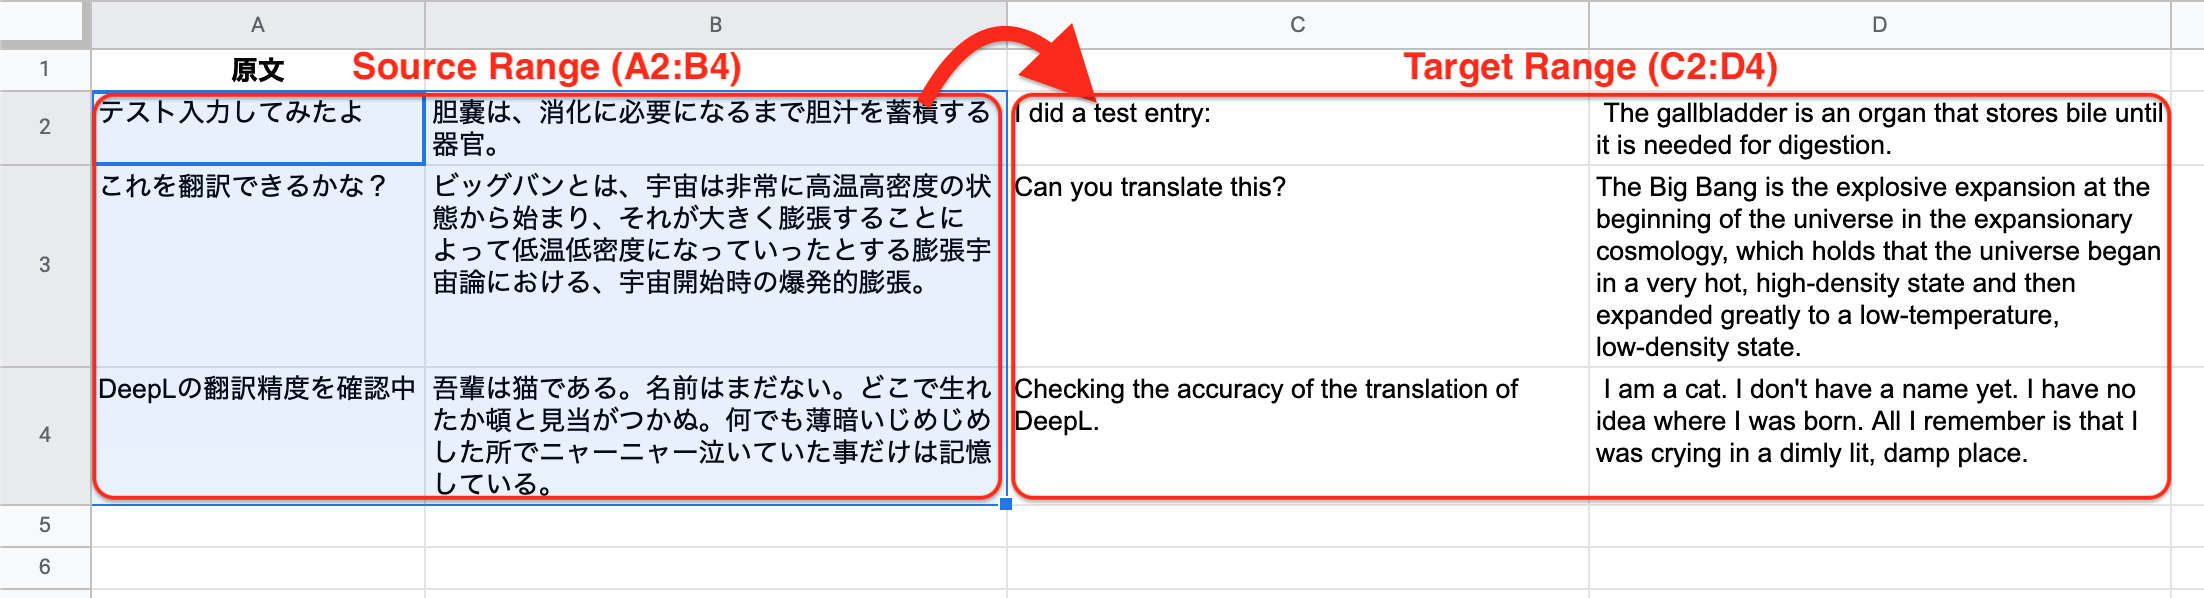 Screenshot of how the translated text will be shown on the spreadsheet